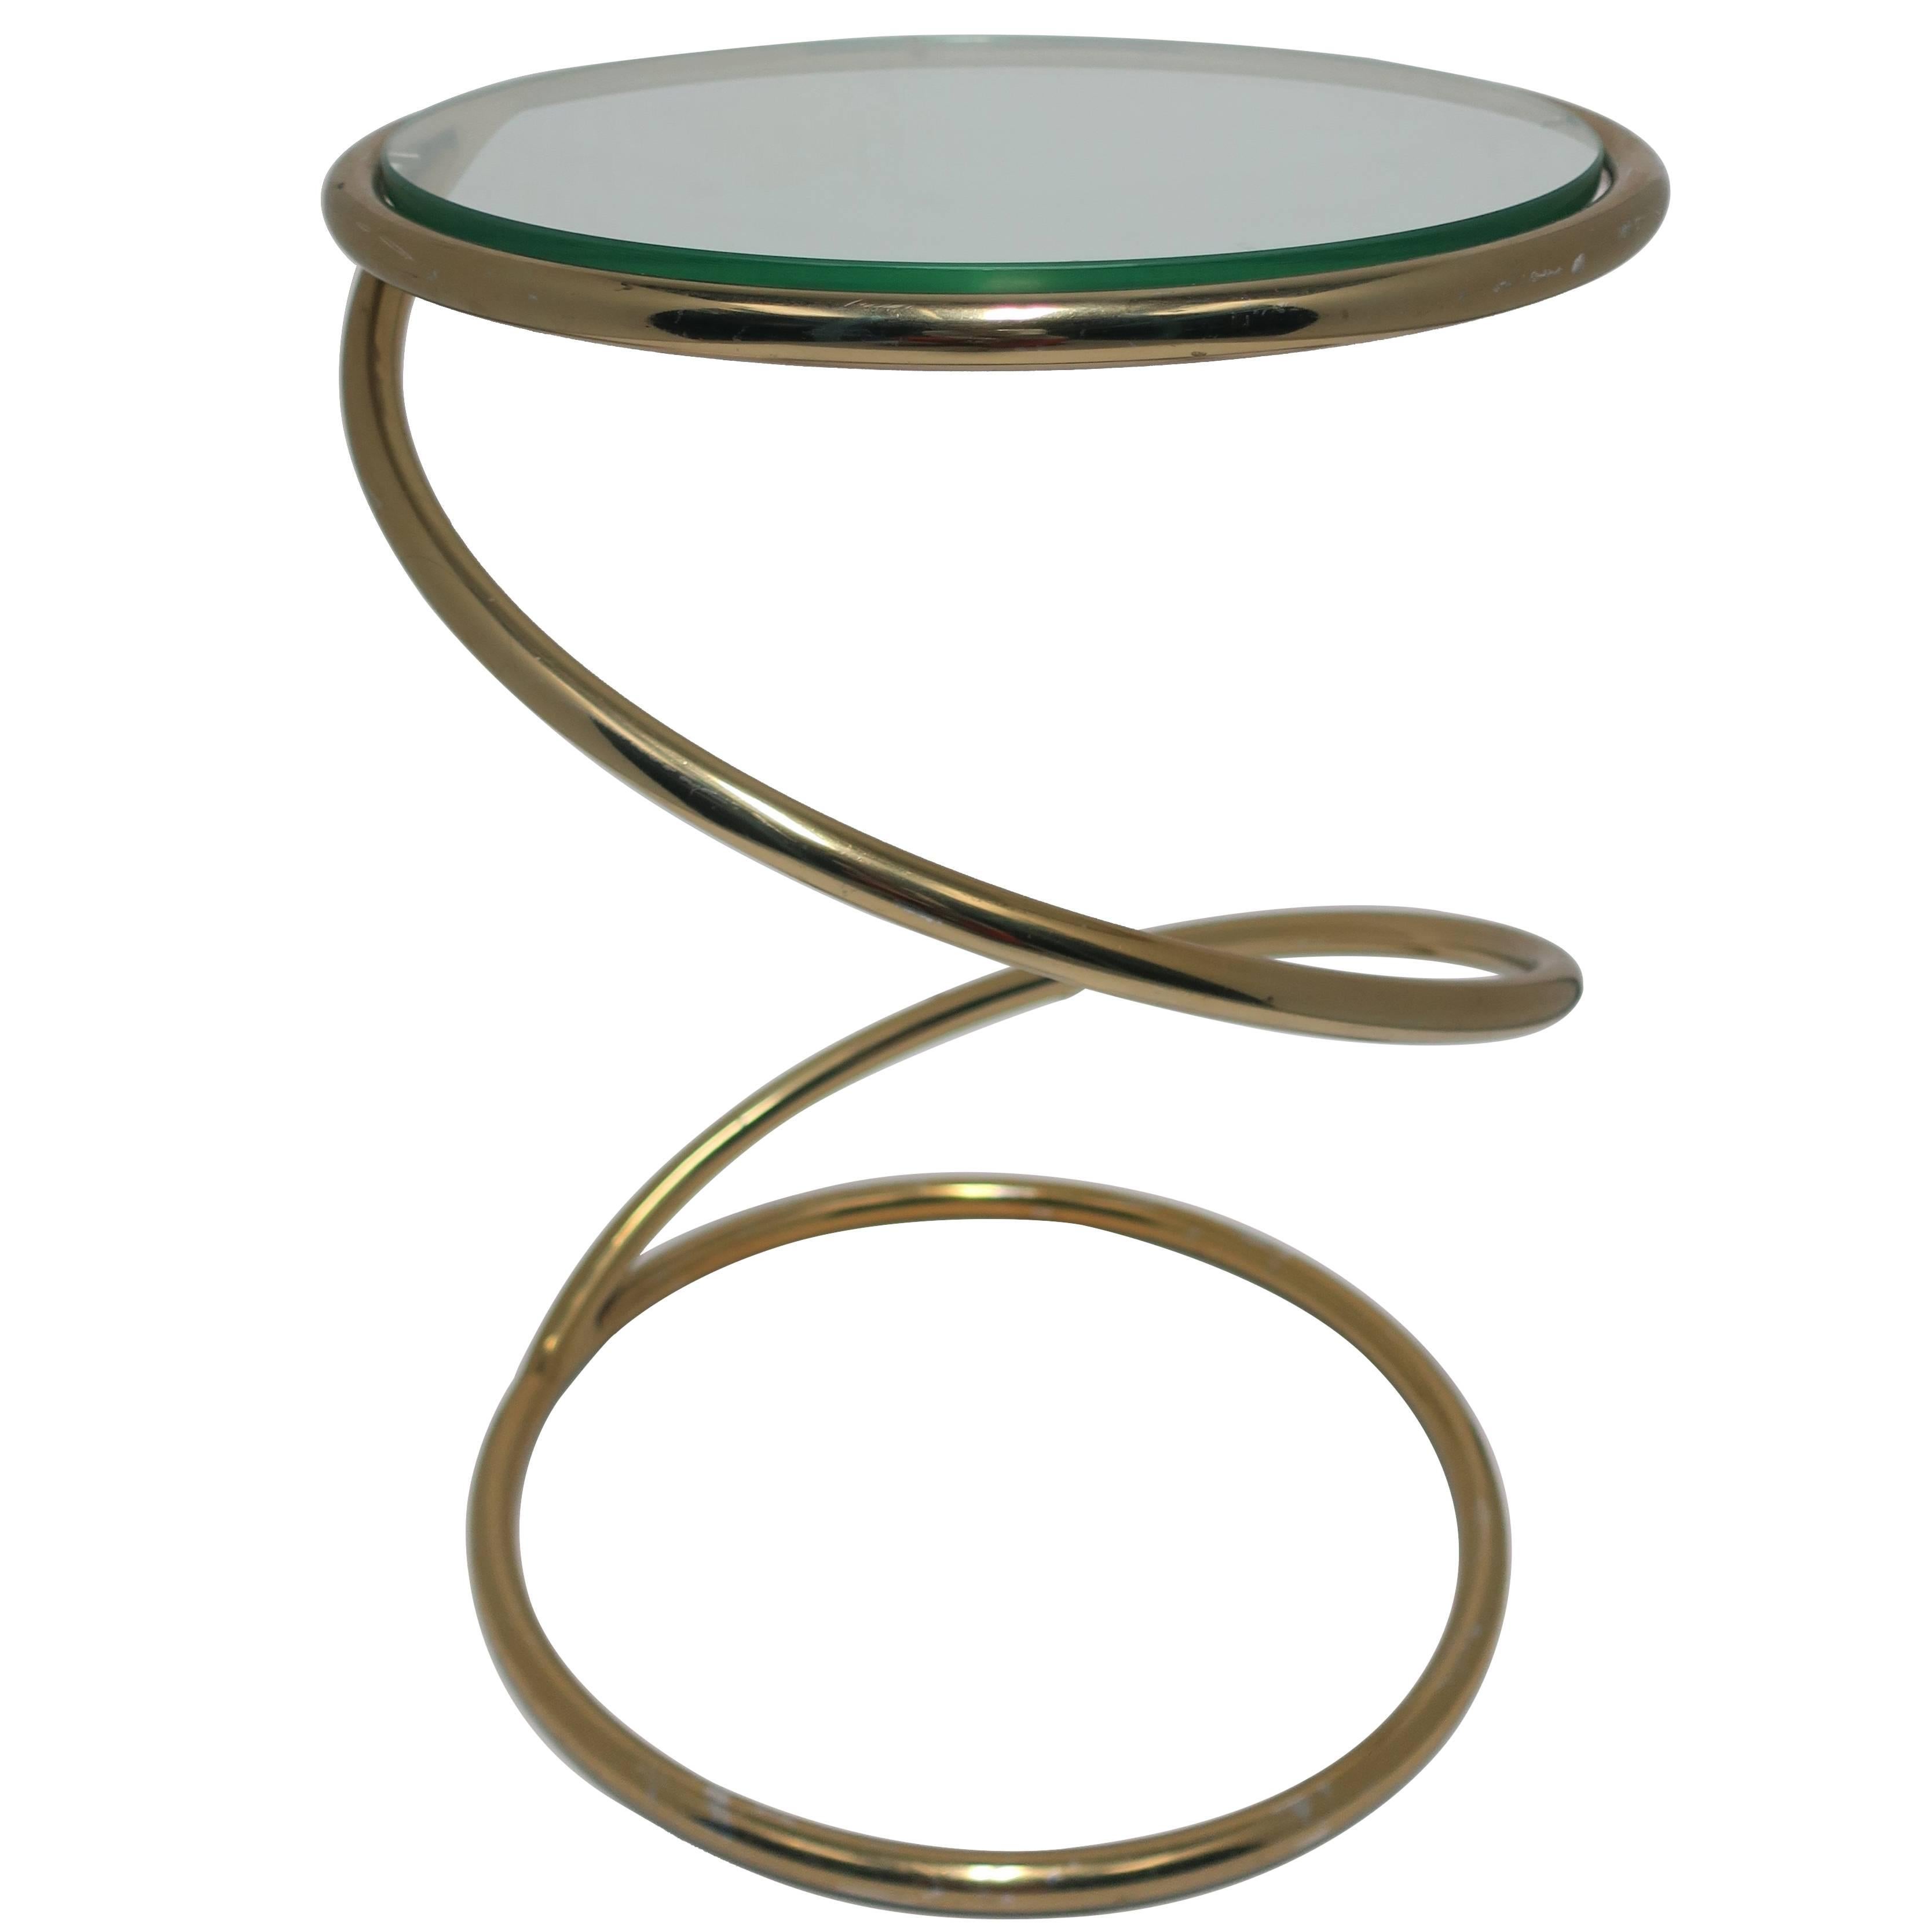 Vintage Modern Round Brass and Glass Twist Side Table after Milo Baughman, 1970s